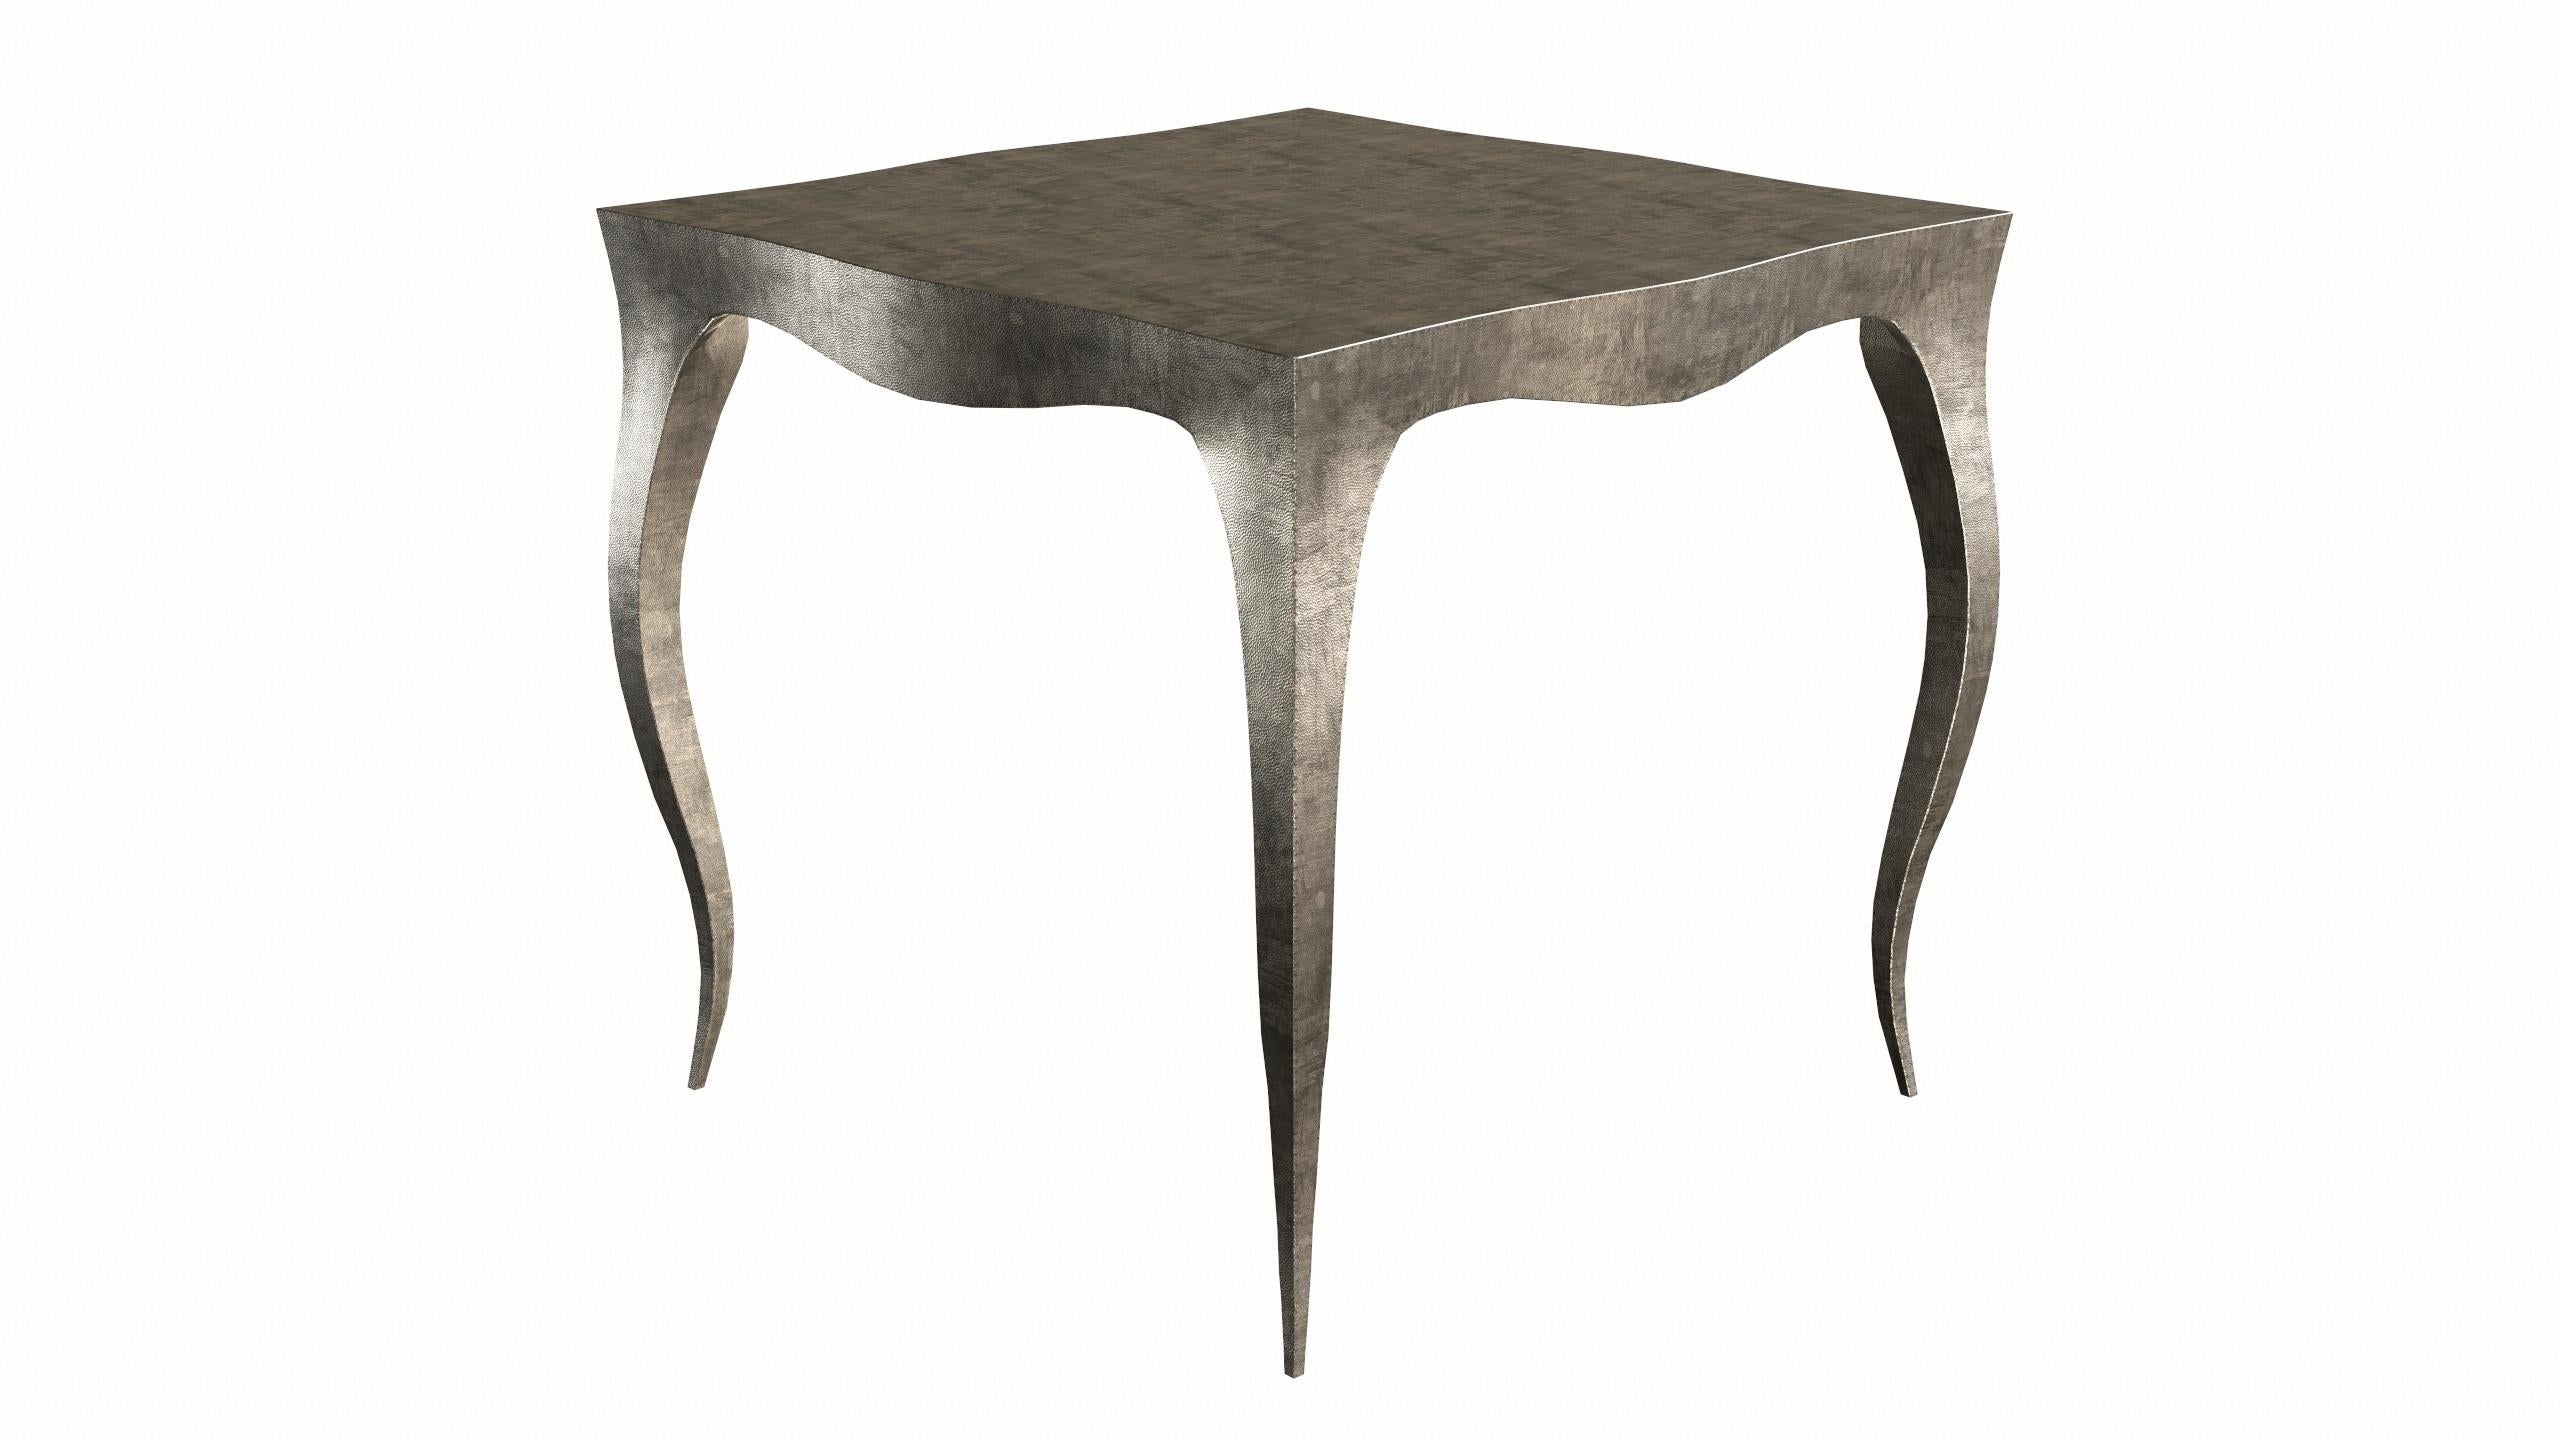 Metal Louise Art Deco Card and Tea Tables Mid. Hammered Antique Bronze by Paul Mathieu For Sale